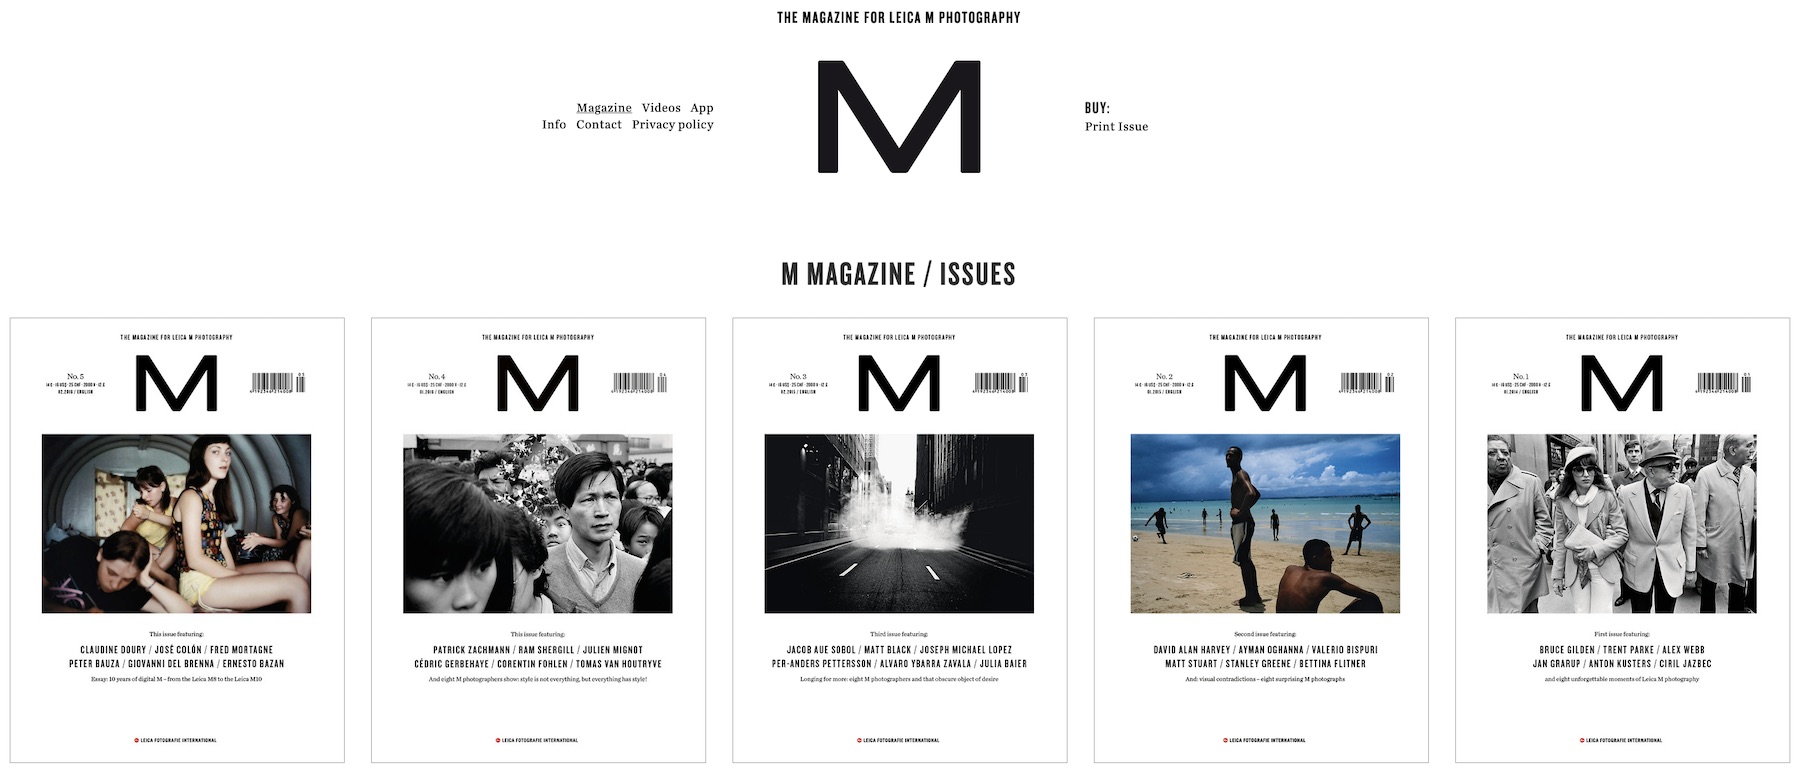 Leica M-Magazine now available for free